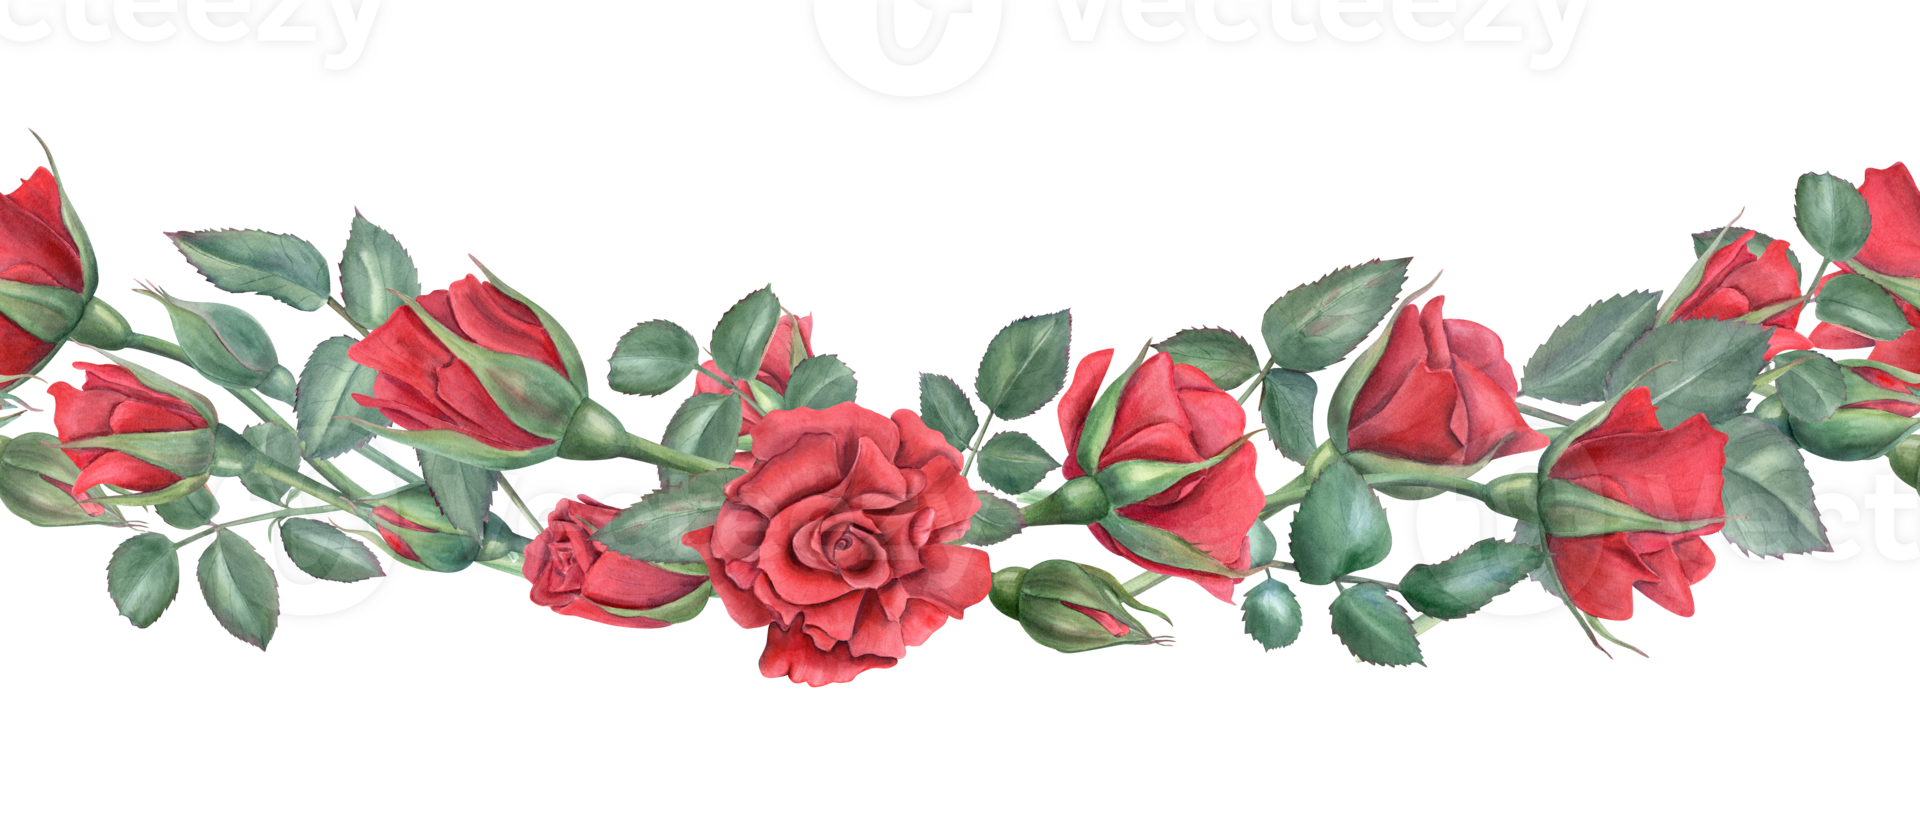 Seamless border with red roses. Scarlet flowers with green leaves. Intertwining rose stems with buds. Blooming summer plants. Watercolor illustration for memorial day decor, birthday design png